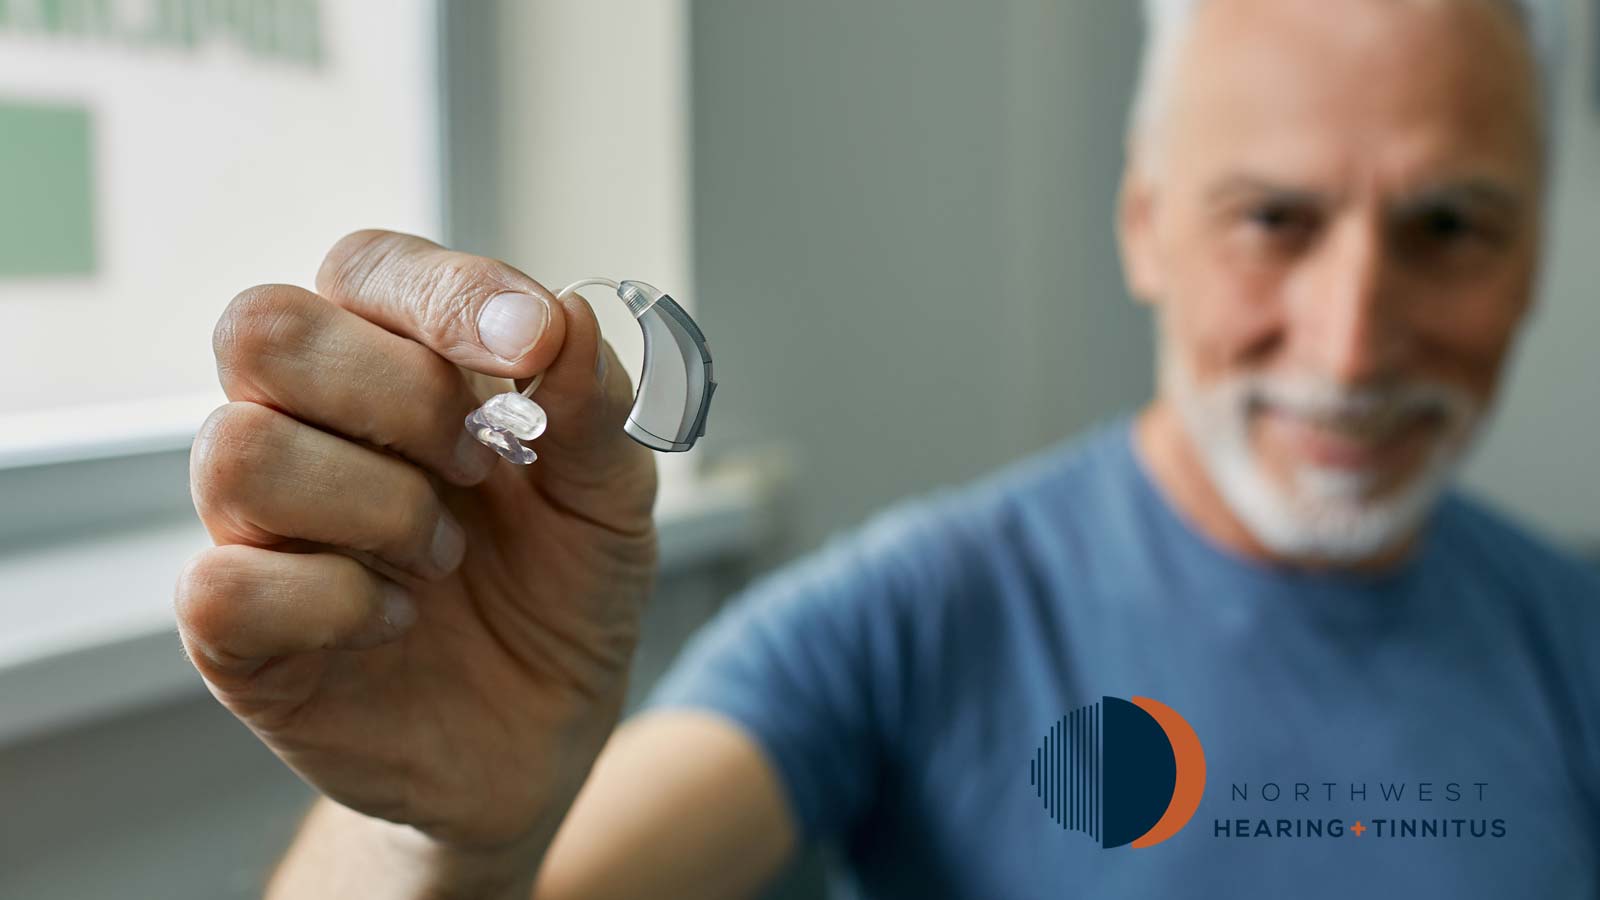 Bluetooth Hearing Aids: Pros and Cons - Northwest Hearing + Tinnitus - Olympia, WA and Seattle, WA